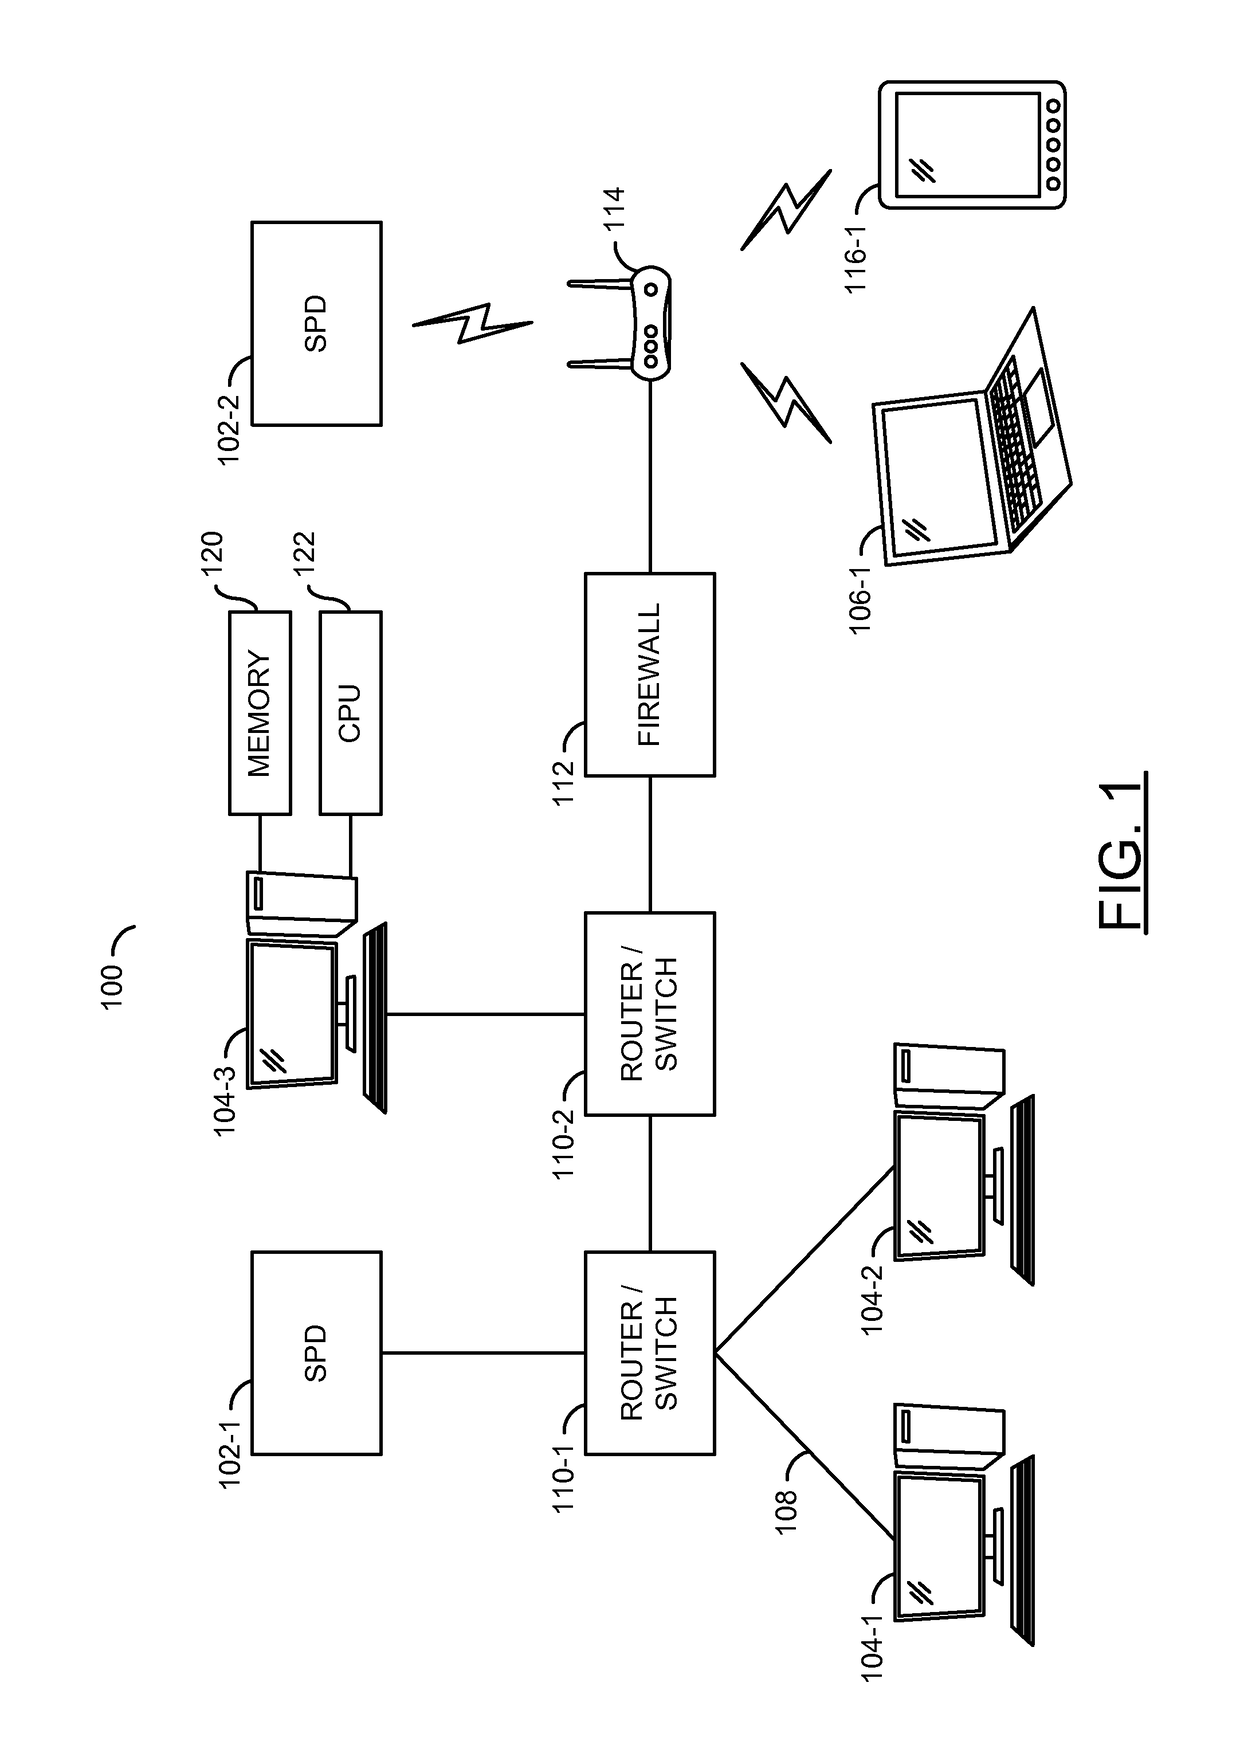 Power management for a self-powered device scheduling a dynamic process